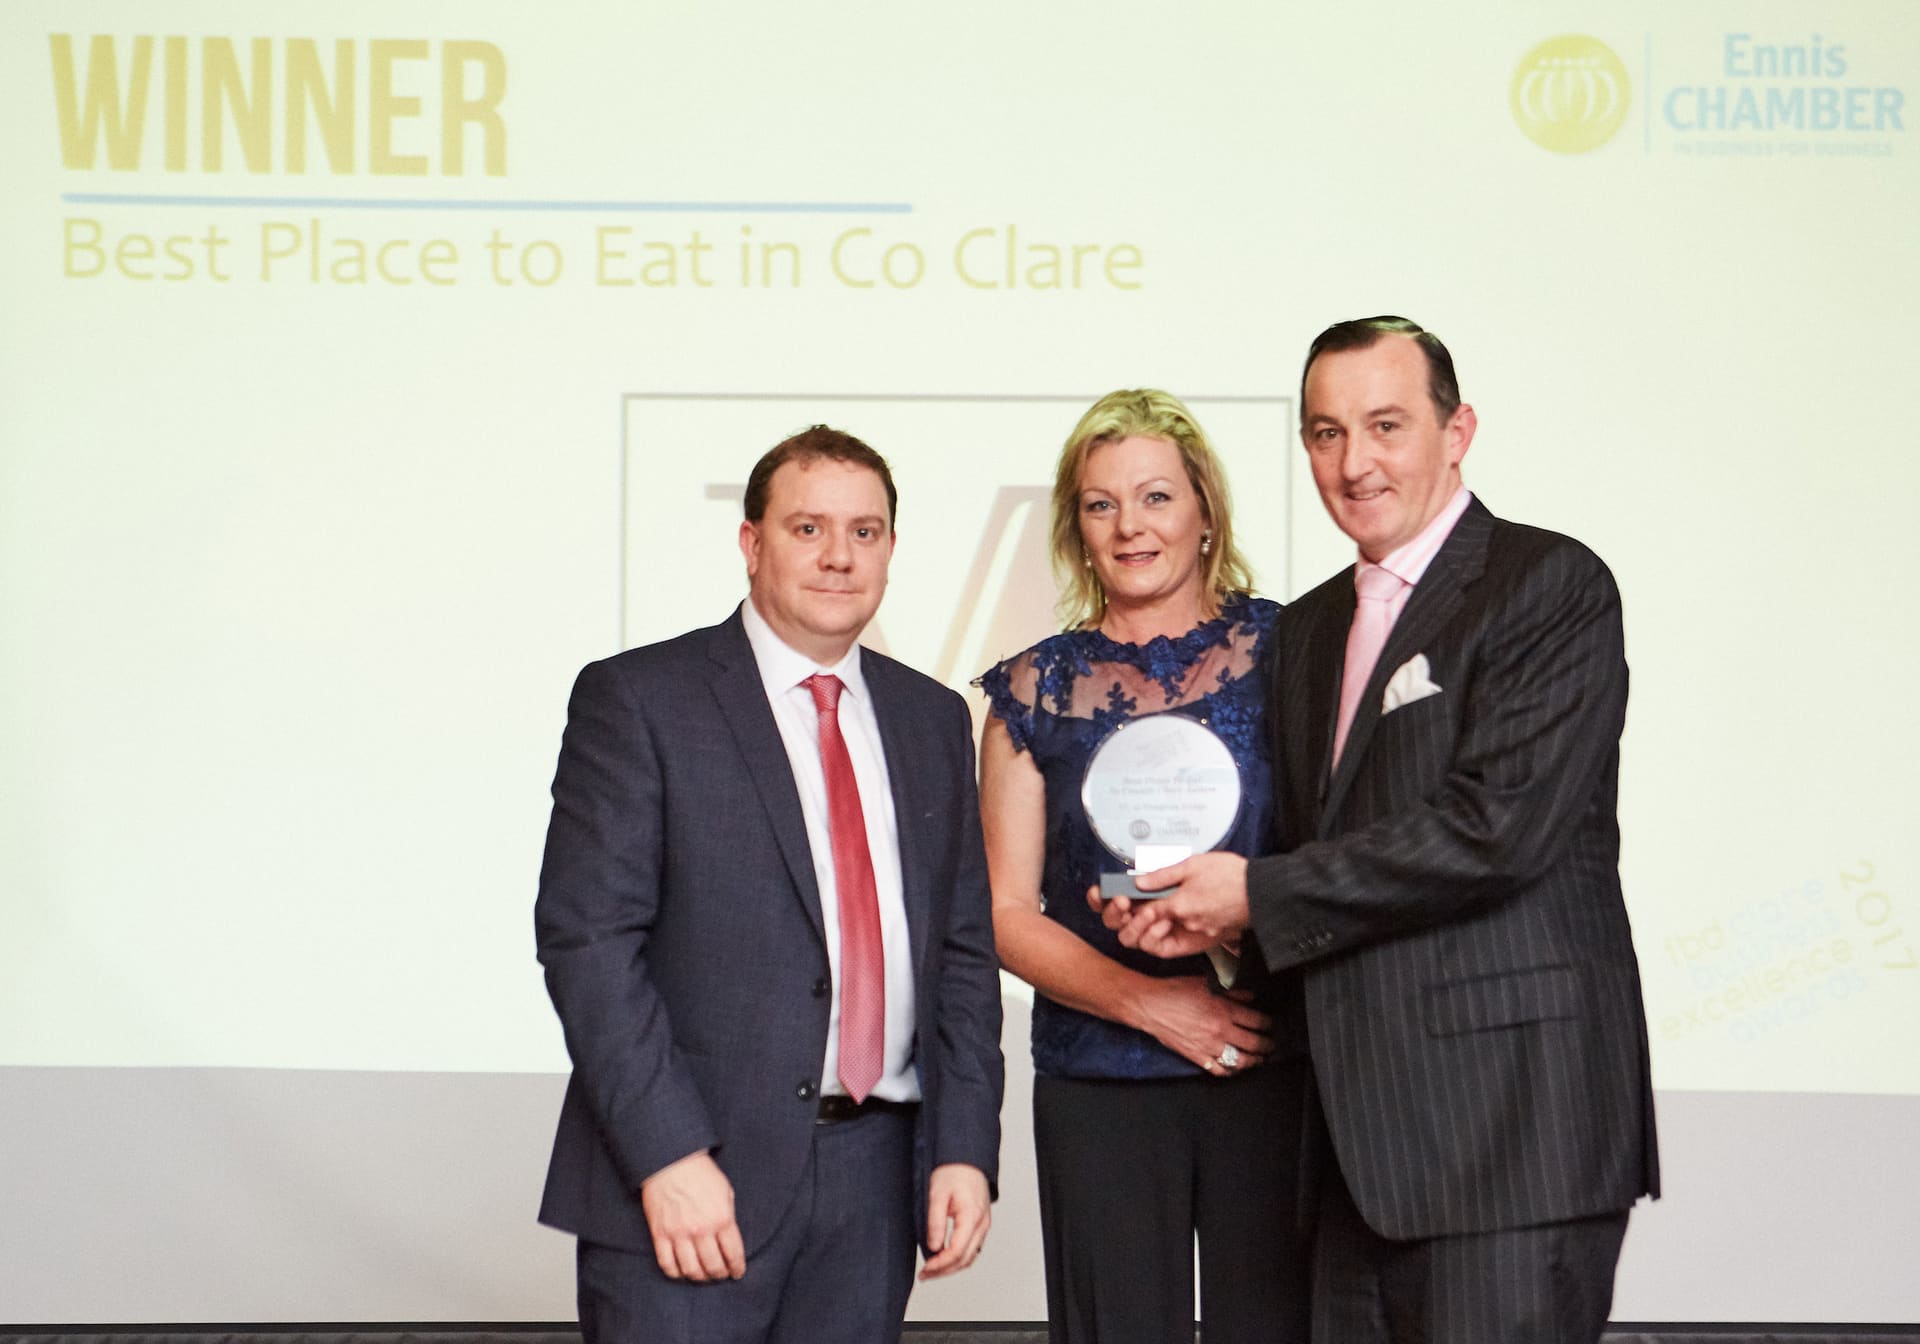 Michael and Maria Vaughan of Vaughan Lodge Lahinch accept award for Best Place to Eat in Clare from William Cahir President of Ennis Chamber